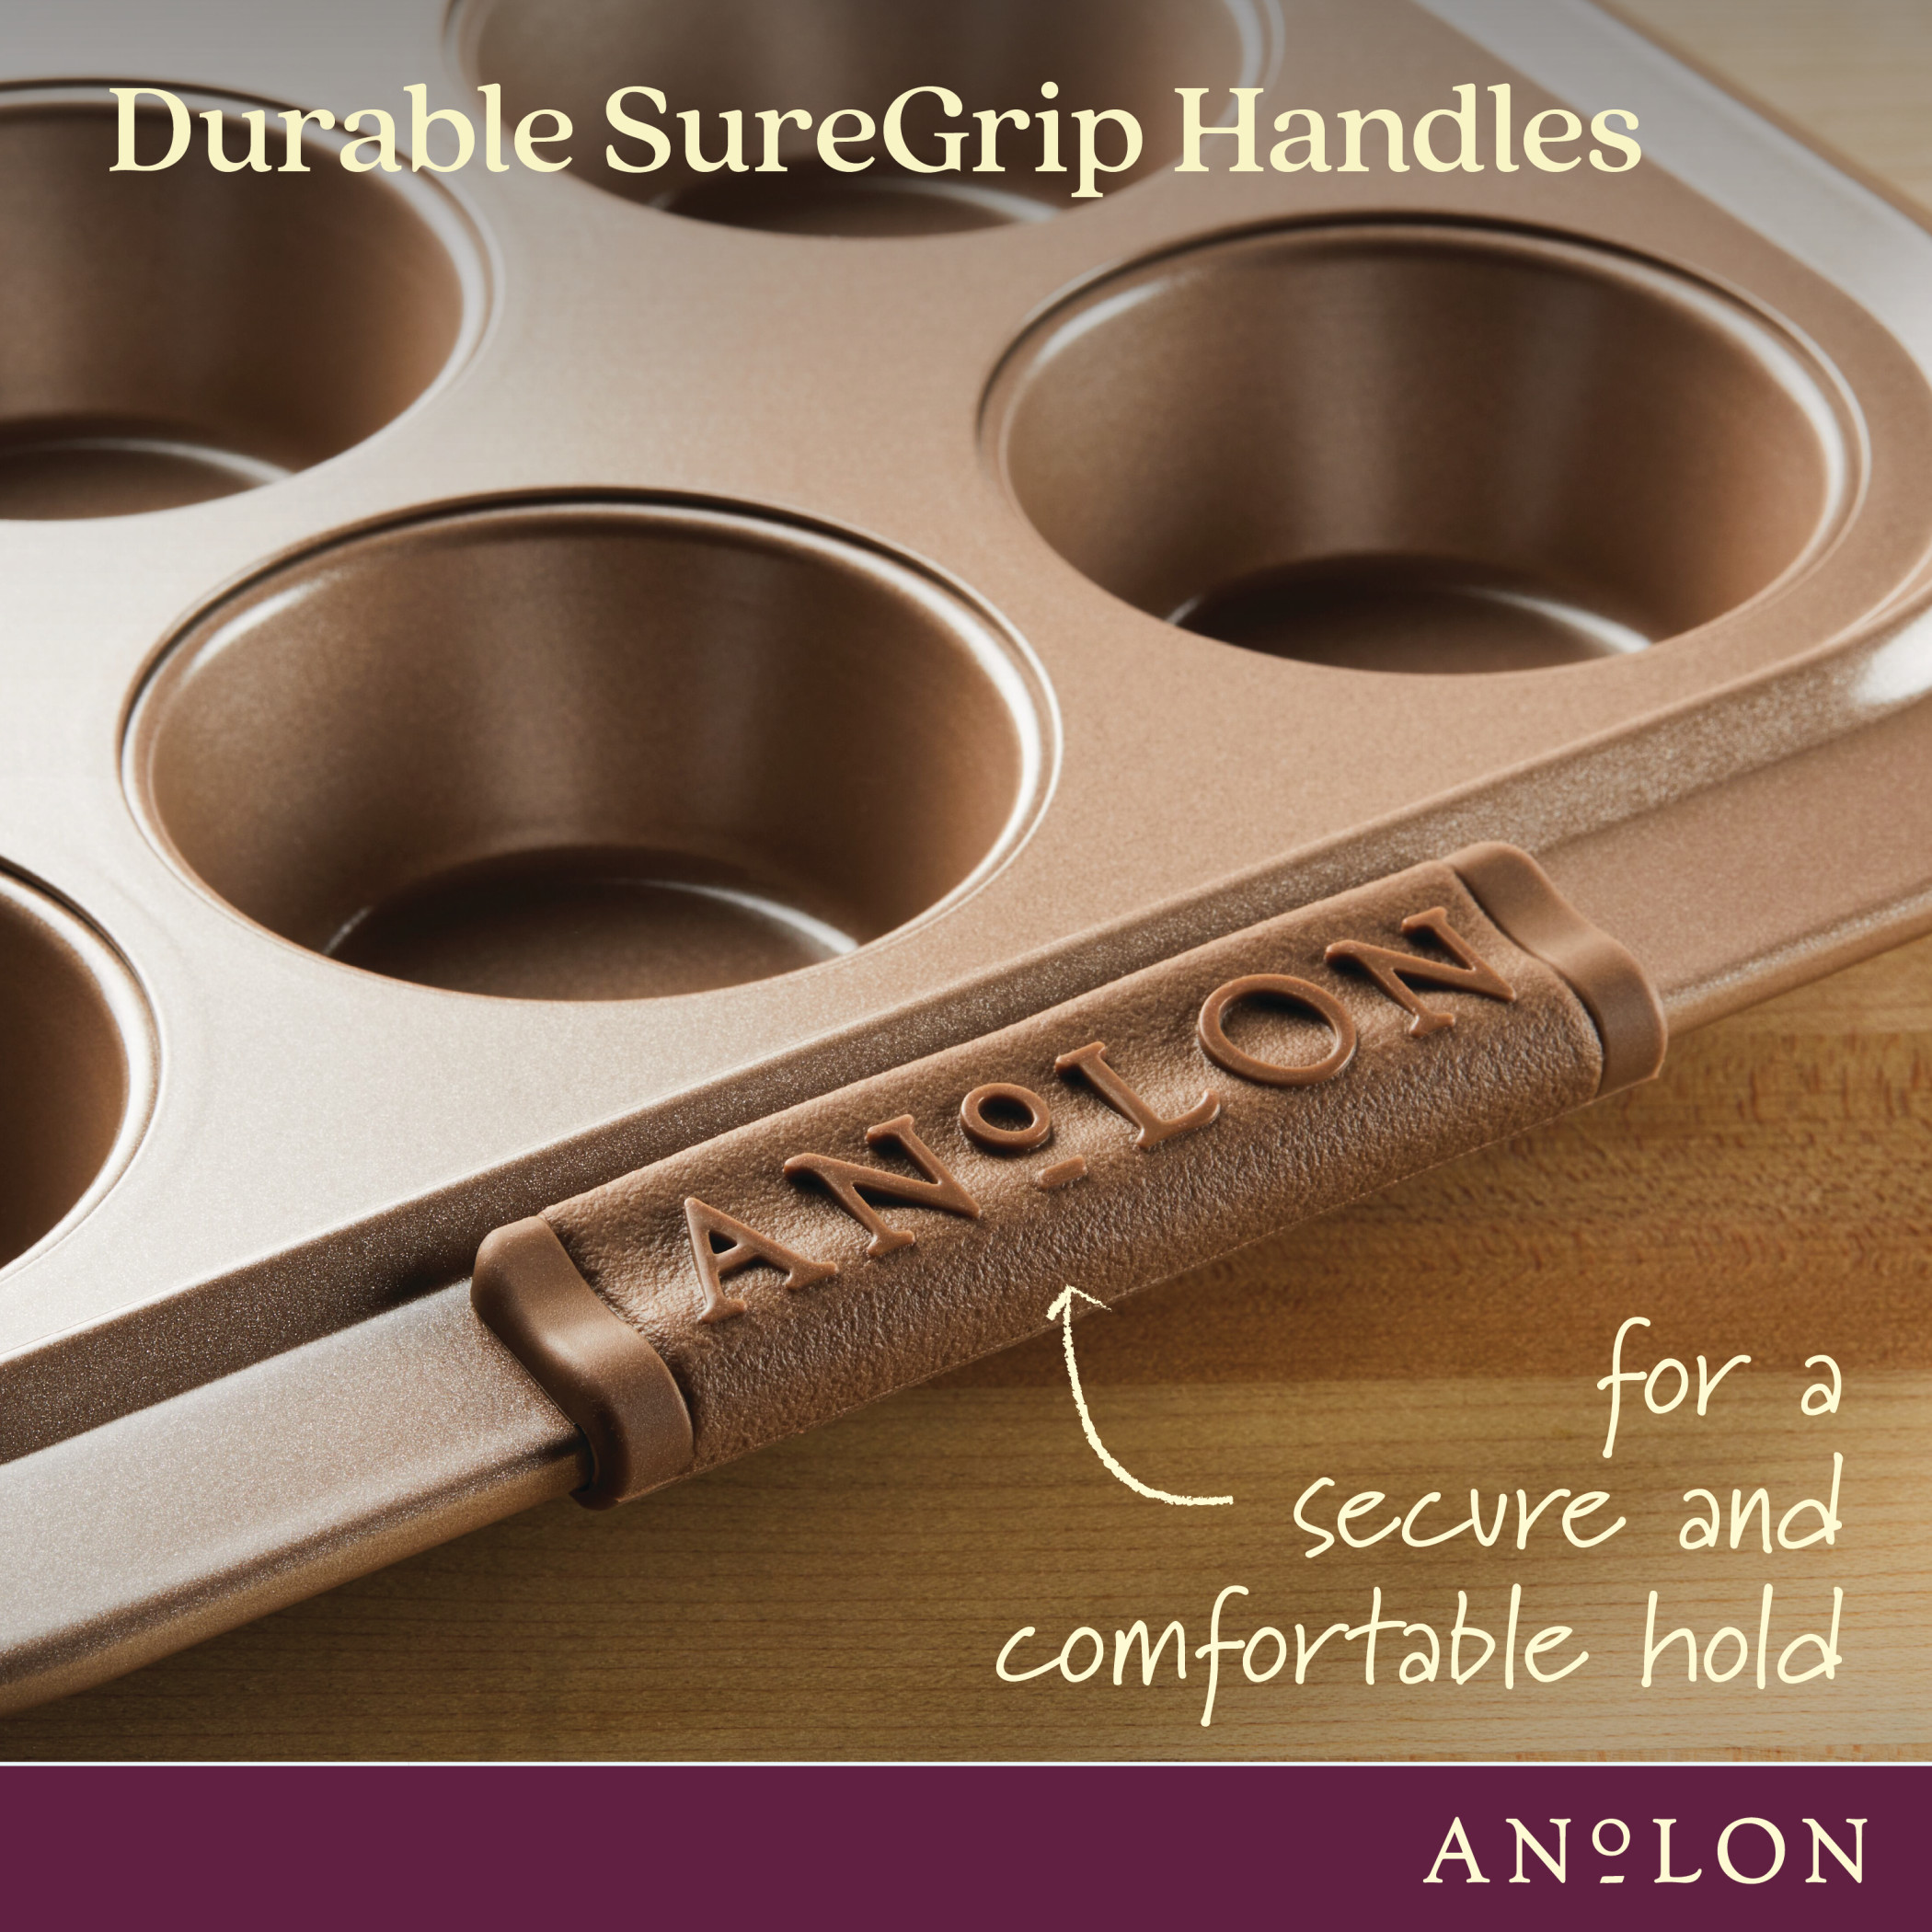 Anolon Advanced Bronze Nonstick Bakeware 12-Cup Muffin Pan with Silicone Grips - image 2 of 7